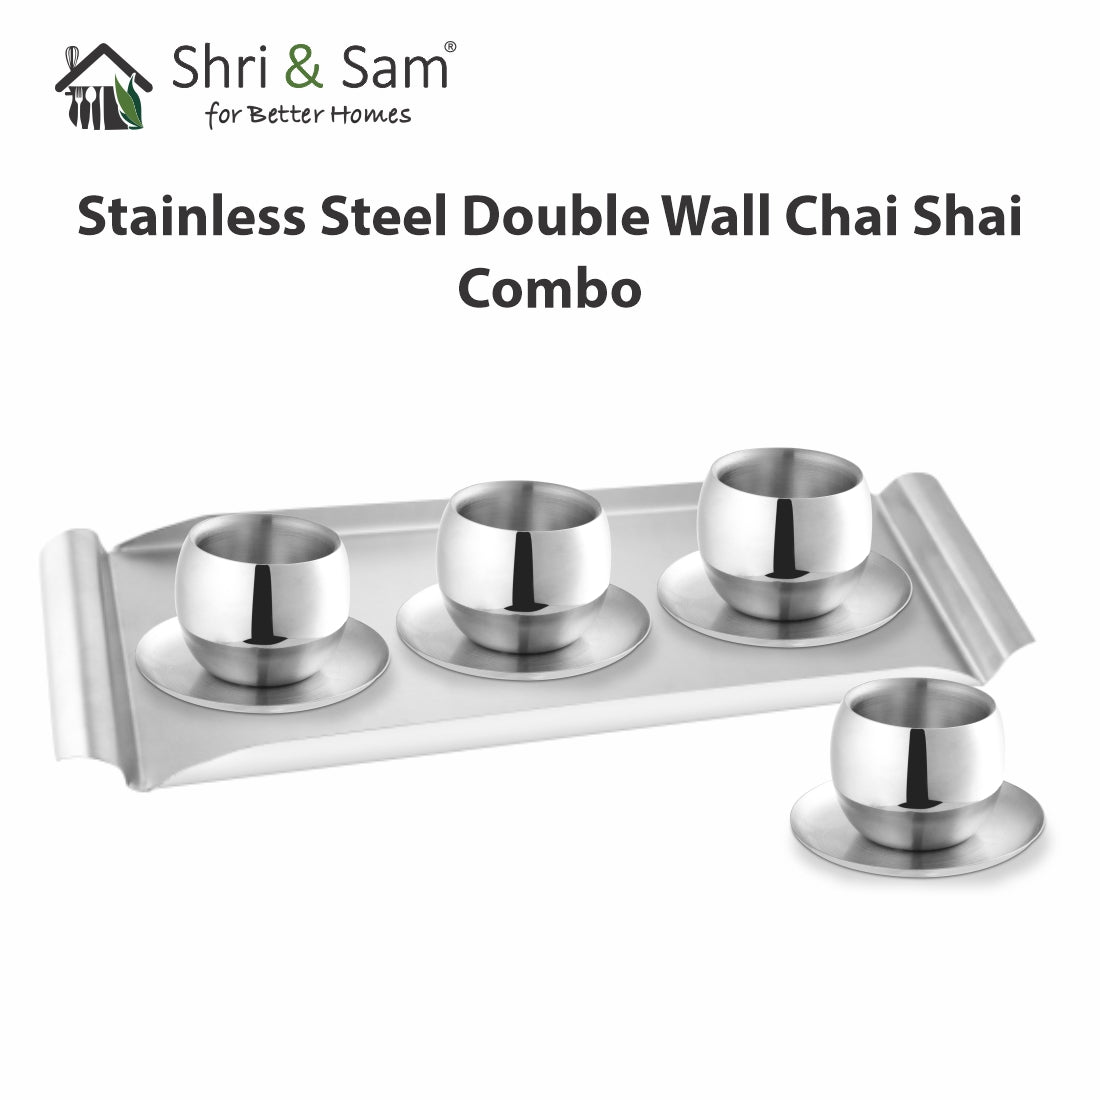 Stainless Steel Double Wall Chai Shai Combo